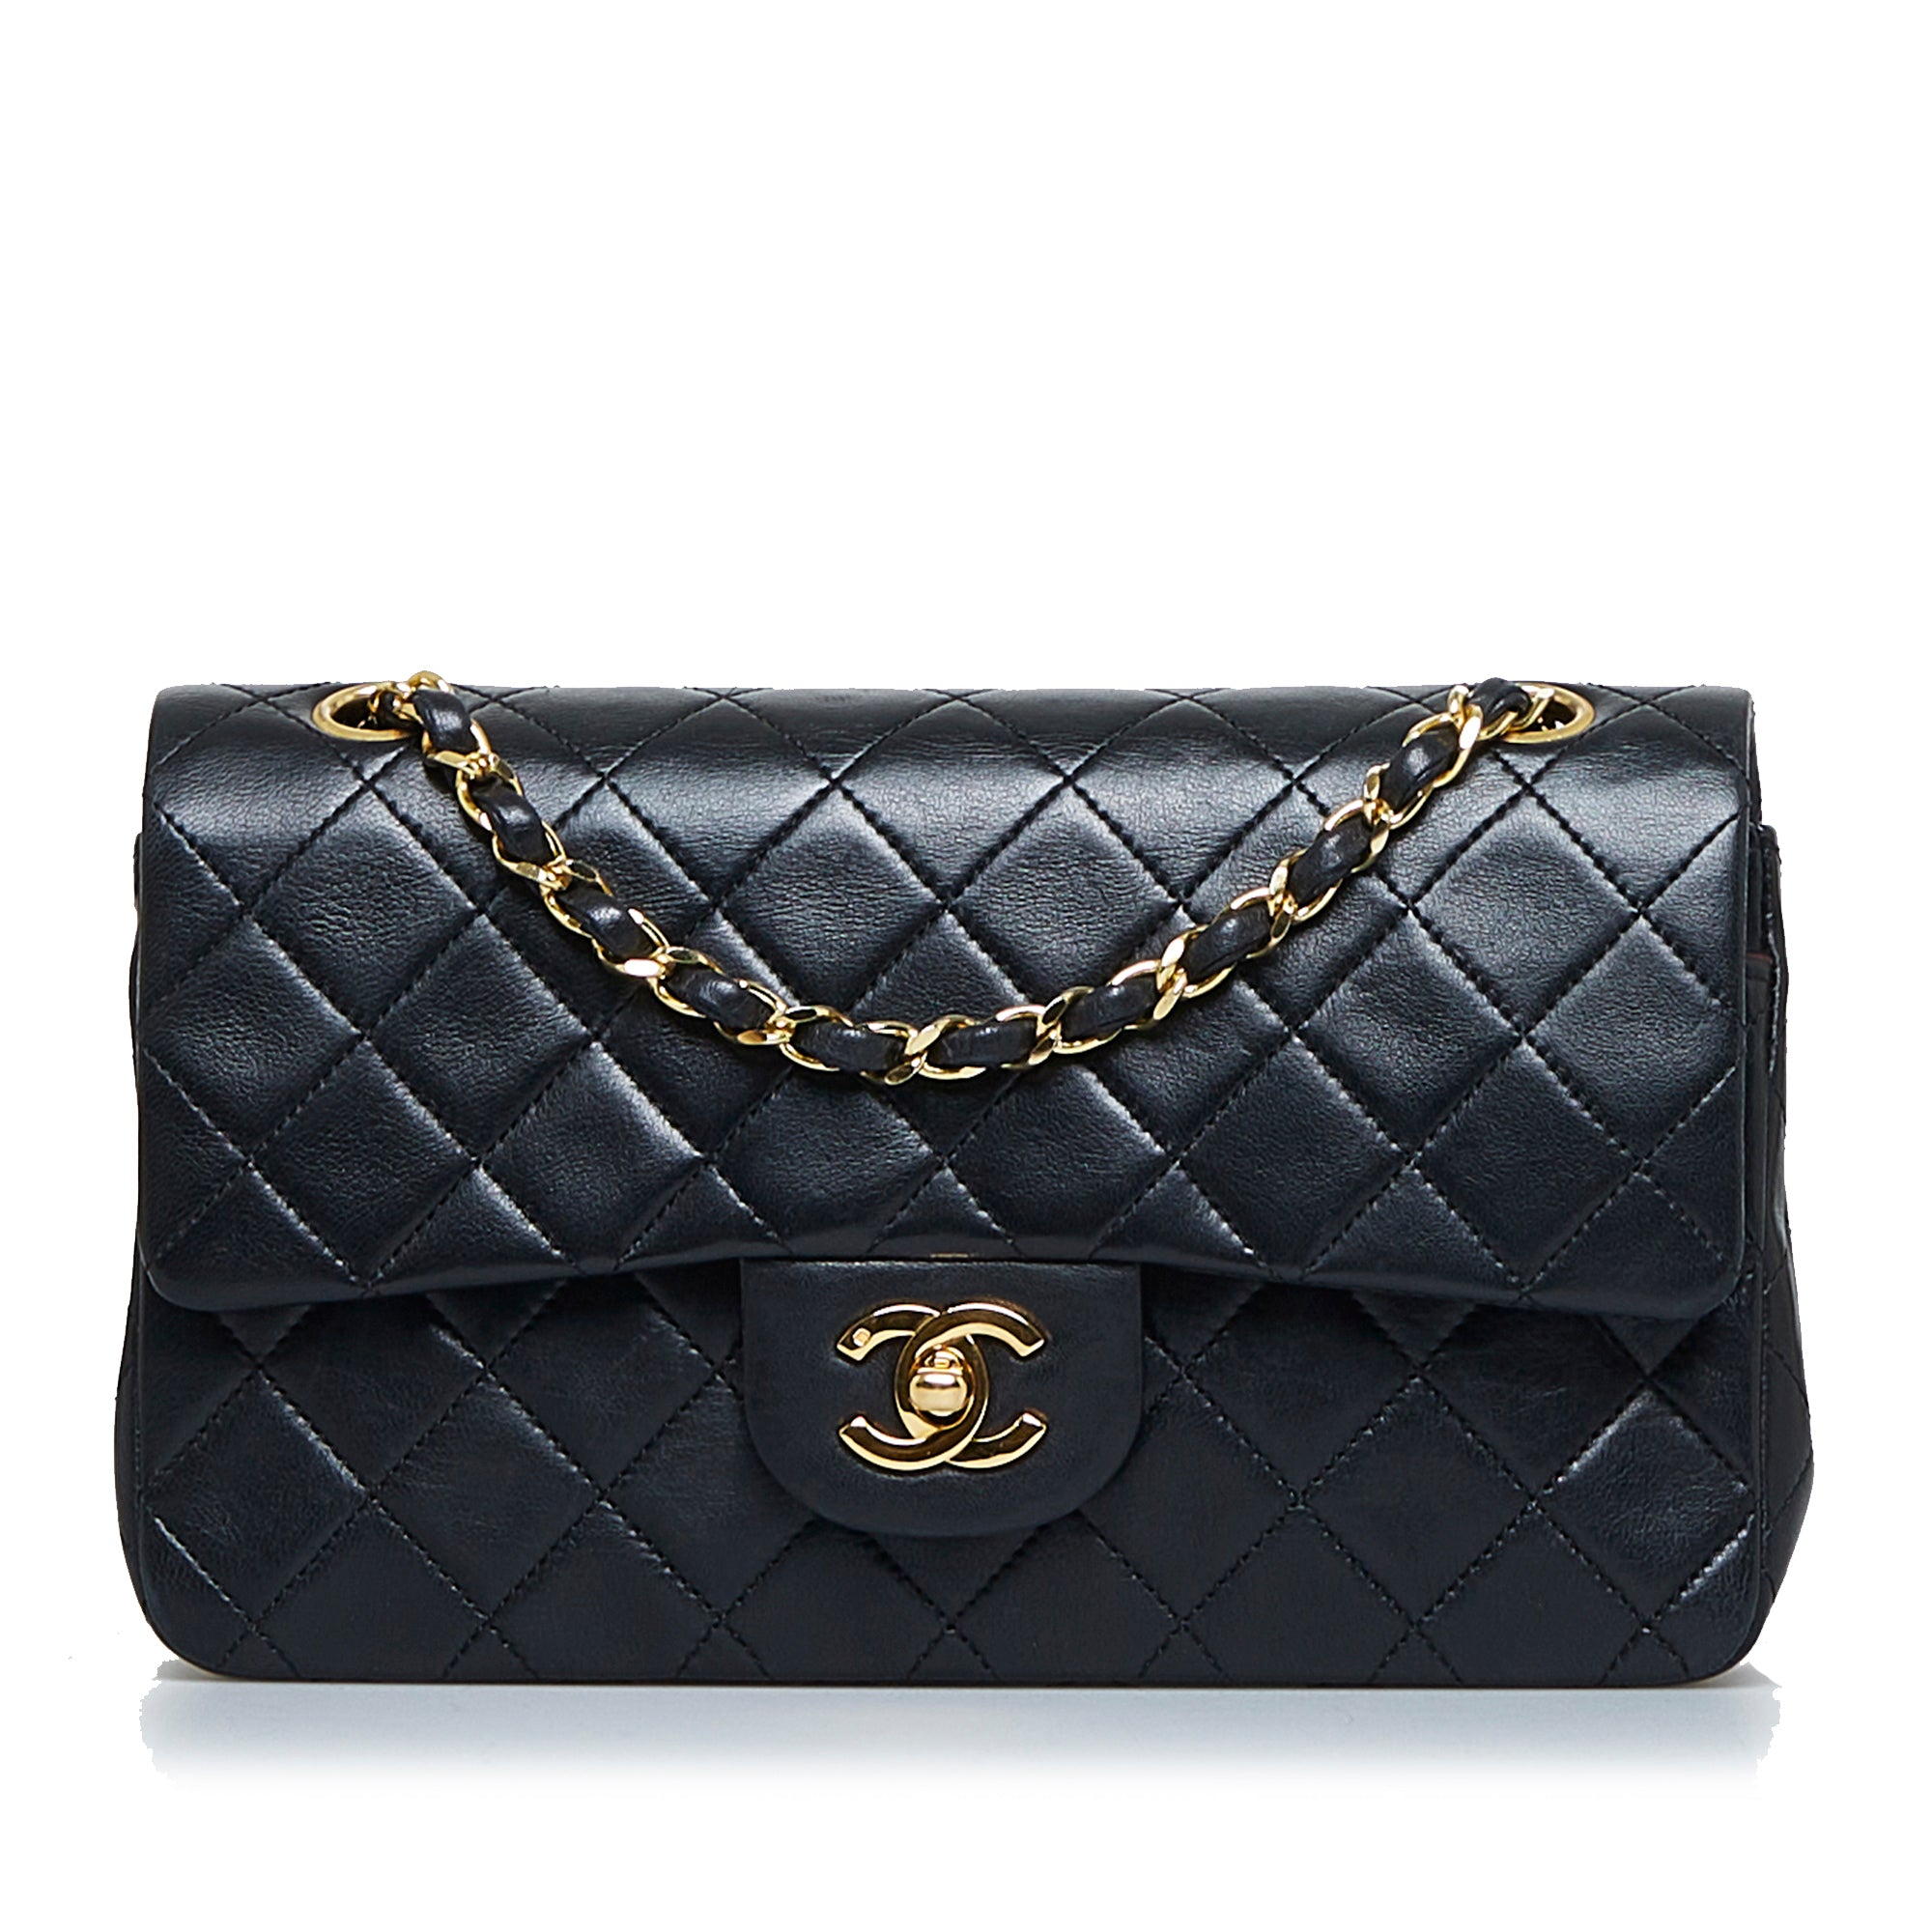 chanel black purse quilted